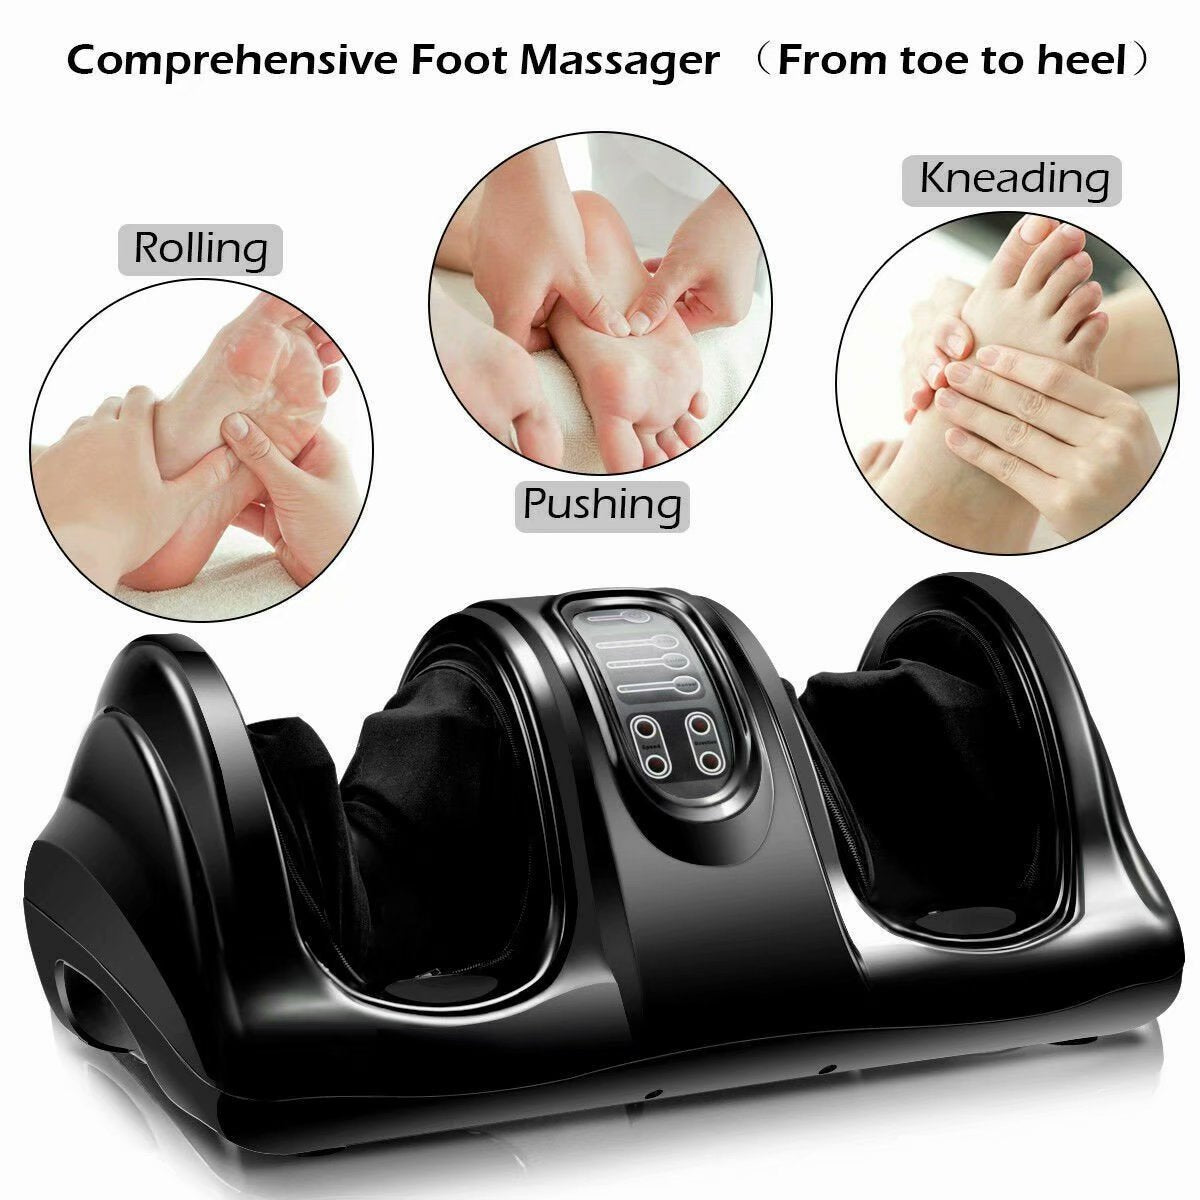 SKONYON Foot Massager Machine Massage for Feet, Chronic Nerve Pain Therapy Spa Gift Deep Kneading Rolling Massage for Leg Calf Ankle, Electric Shiatsu Foot Massager w/ Remote, Black